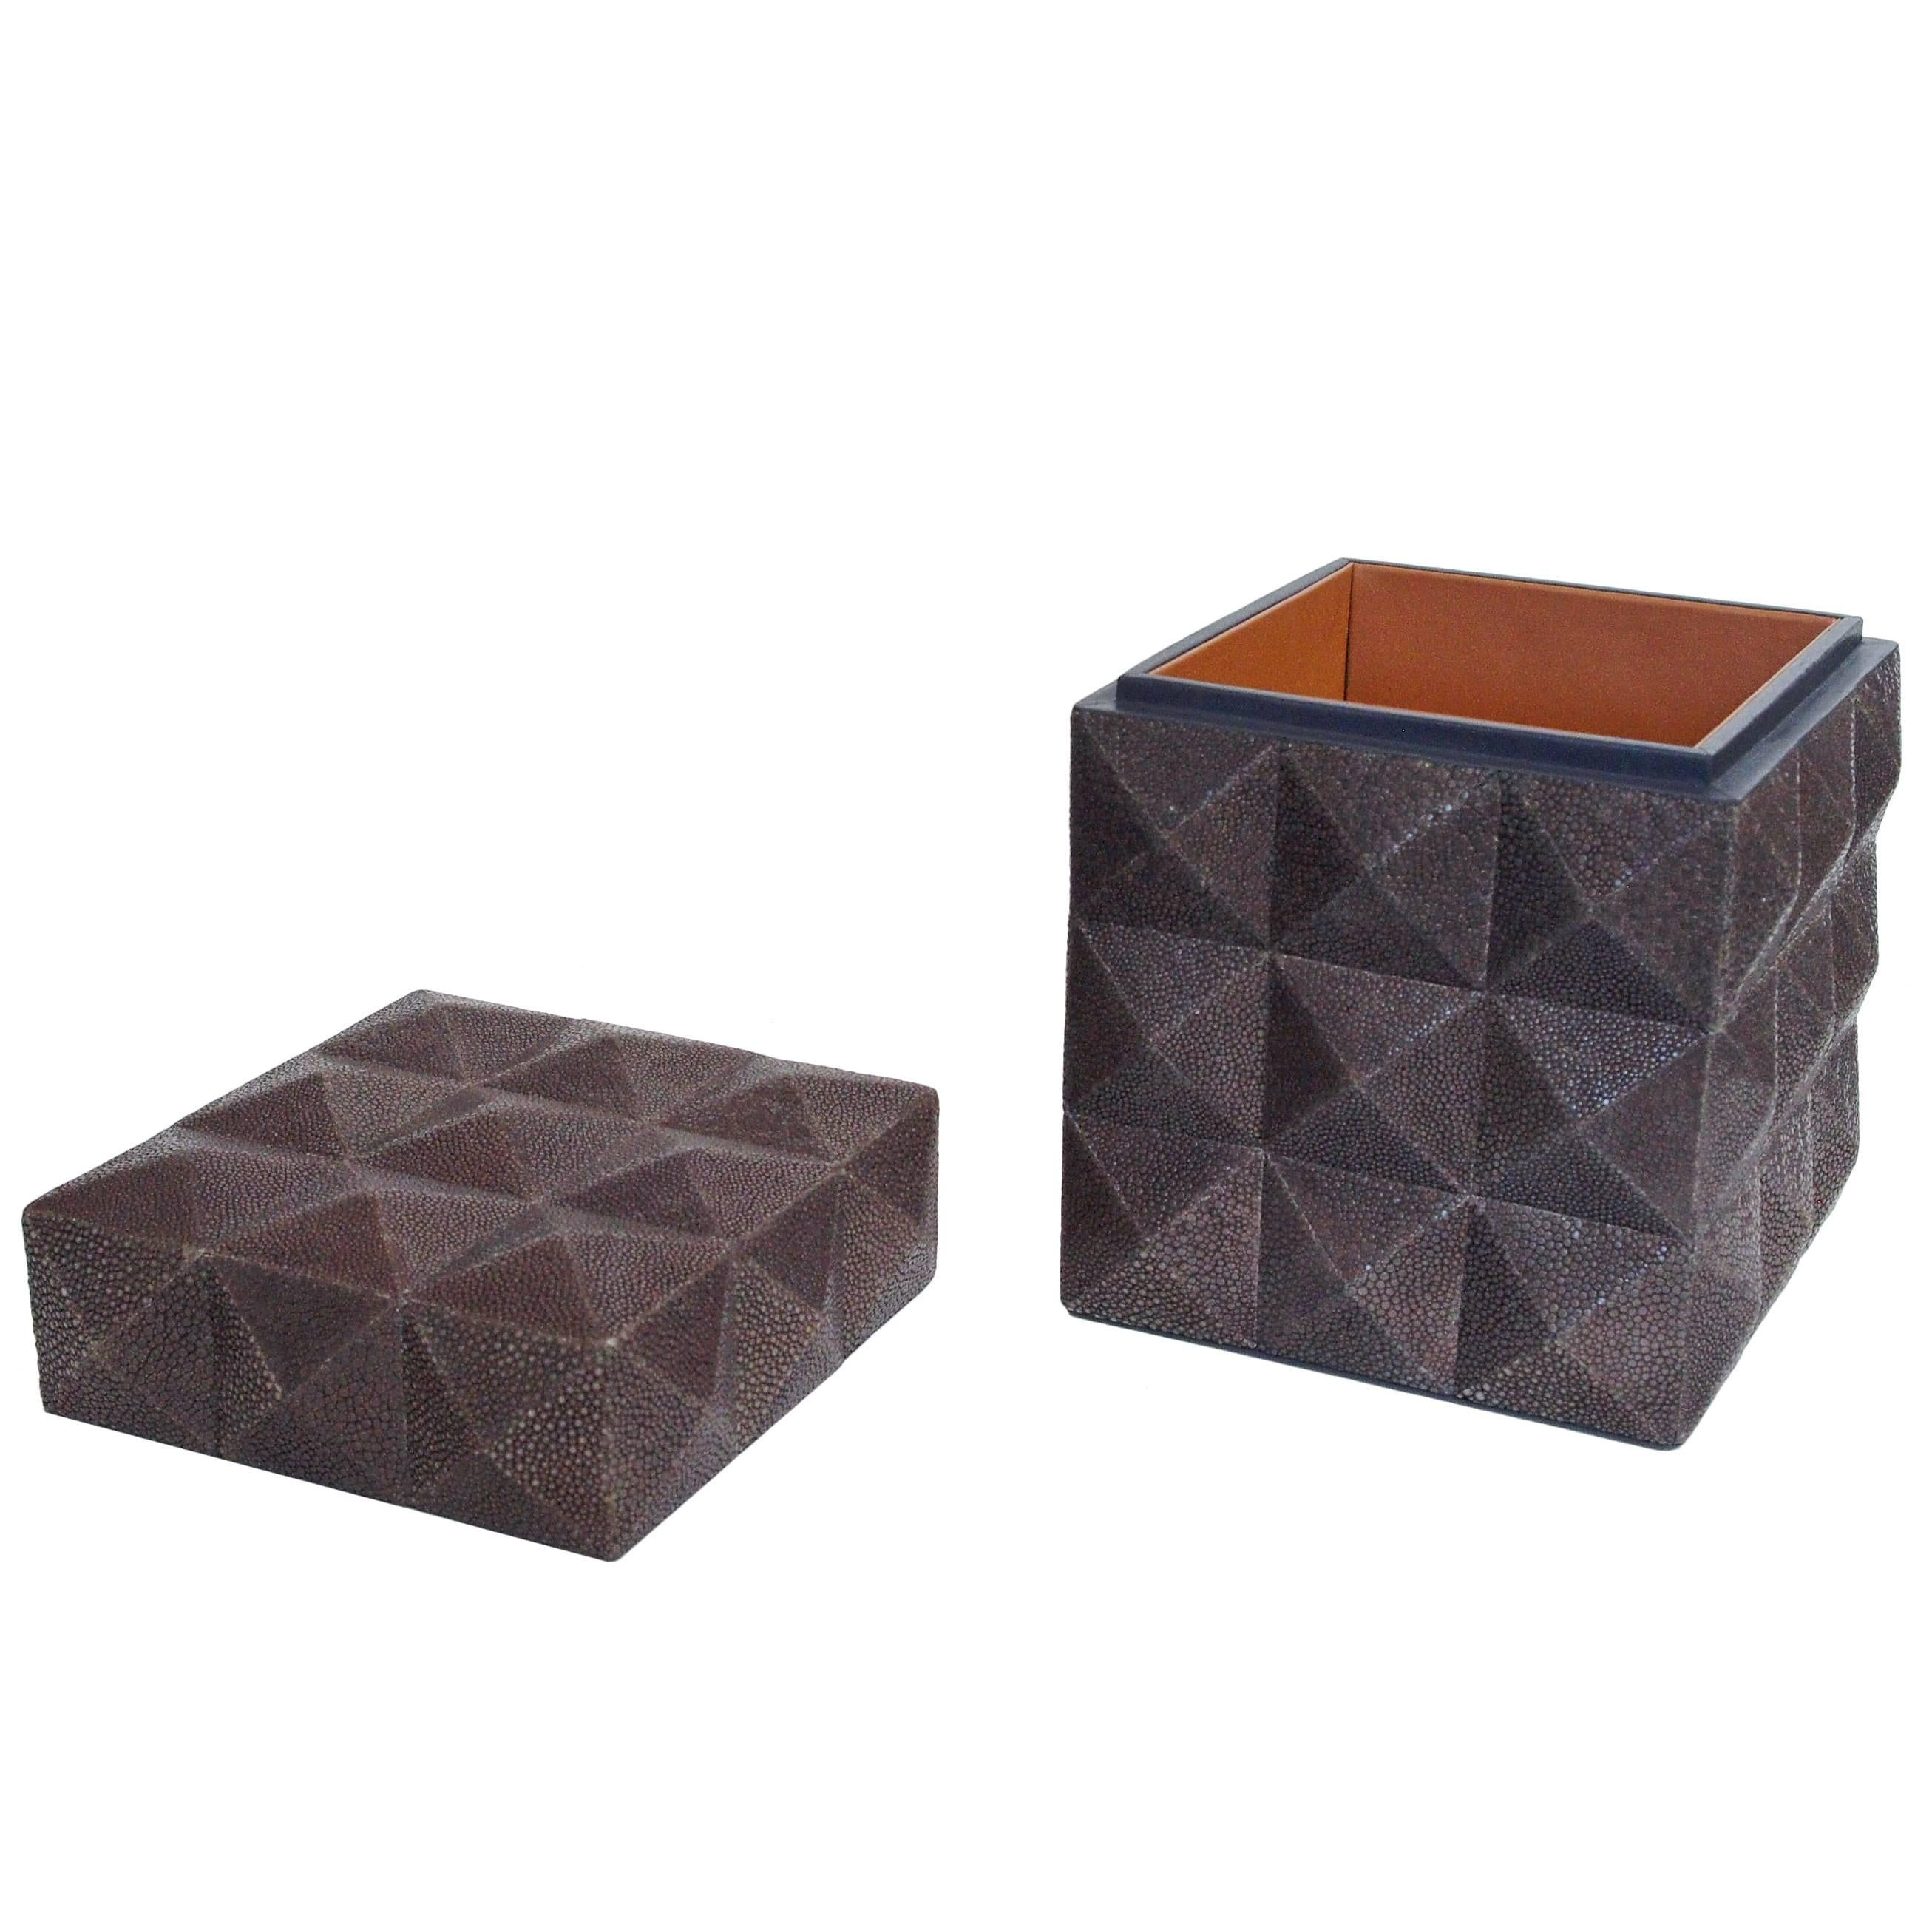 Italian gray Shagreen box with four-sided pyramid pattern
Designed by Fabio Bergomi for Fabio Ltd, made in Italy
Measures: Height 8 inches, width 6 inches, depth 6 inches
1 in stock in Palm Springs ON FINAL CLEARANCE SALE for $899 !!! 
Order